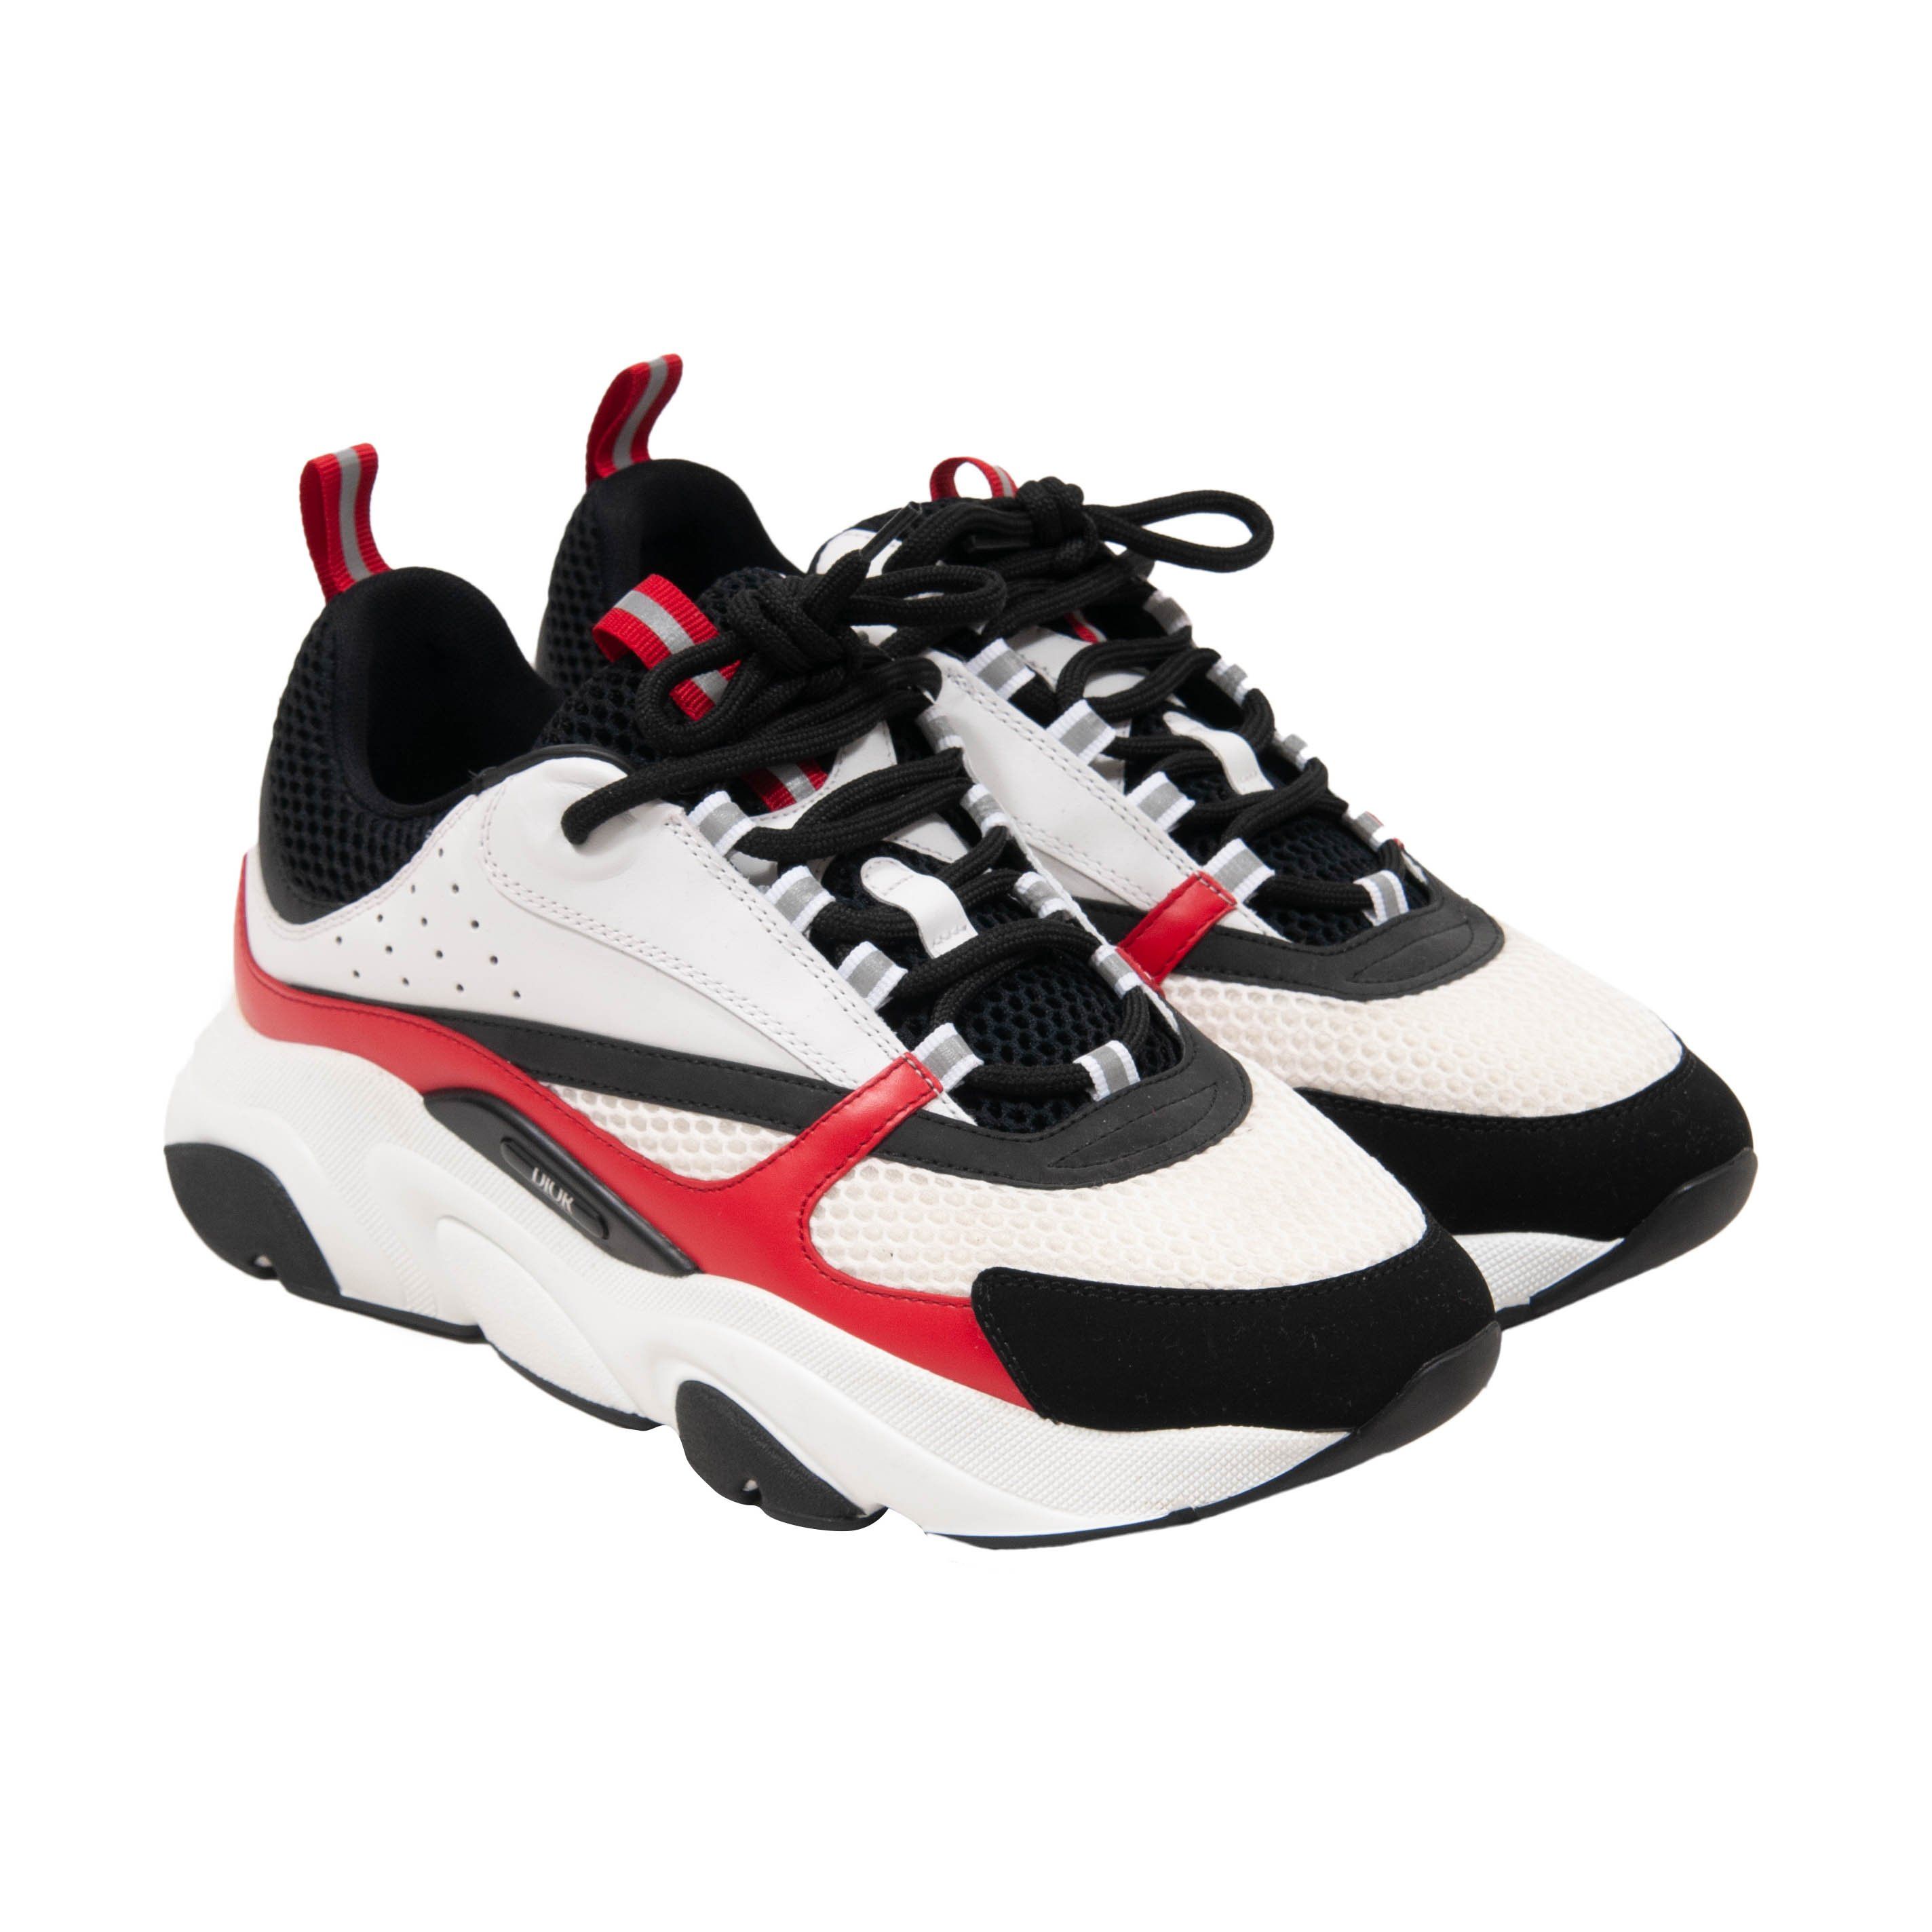 Dior, Shoes, Christian Dior B22 Sneakers Red And Black